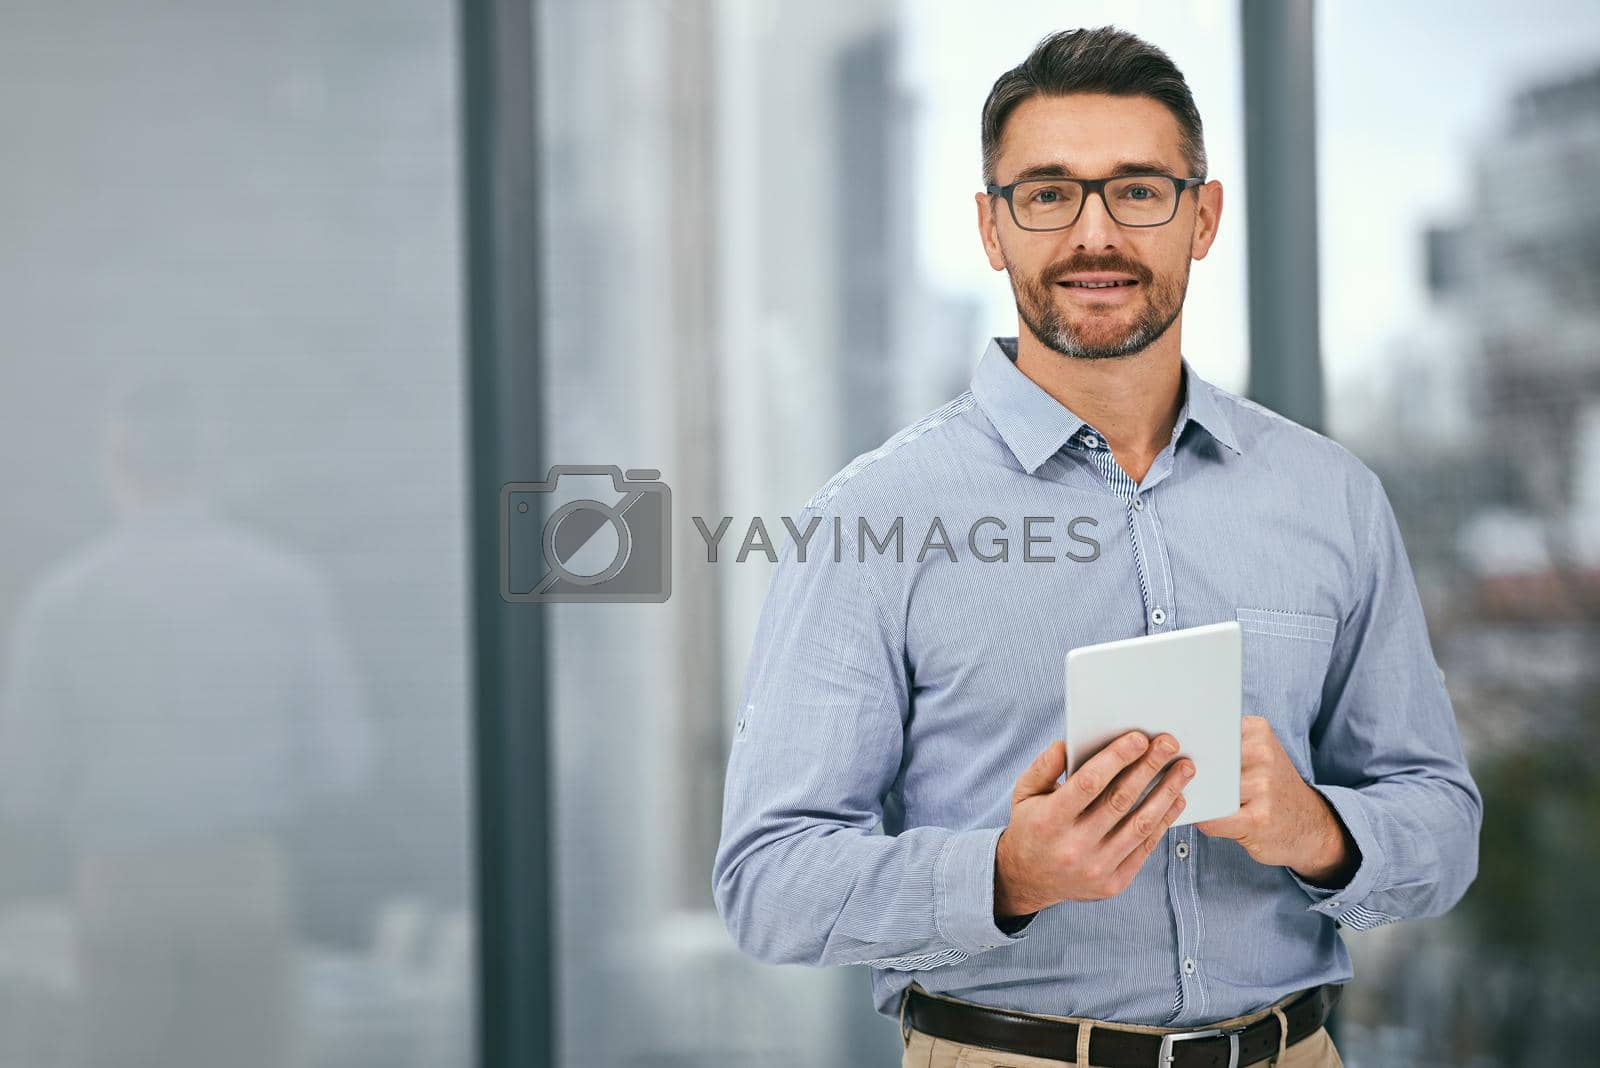 Royalty free image of Its how I choose to do business. Portrait of a mature businessman using a digital tablet in an office. by YuriArcurs